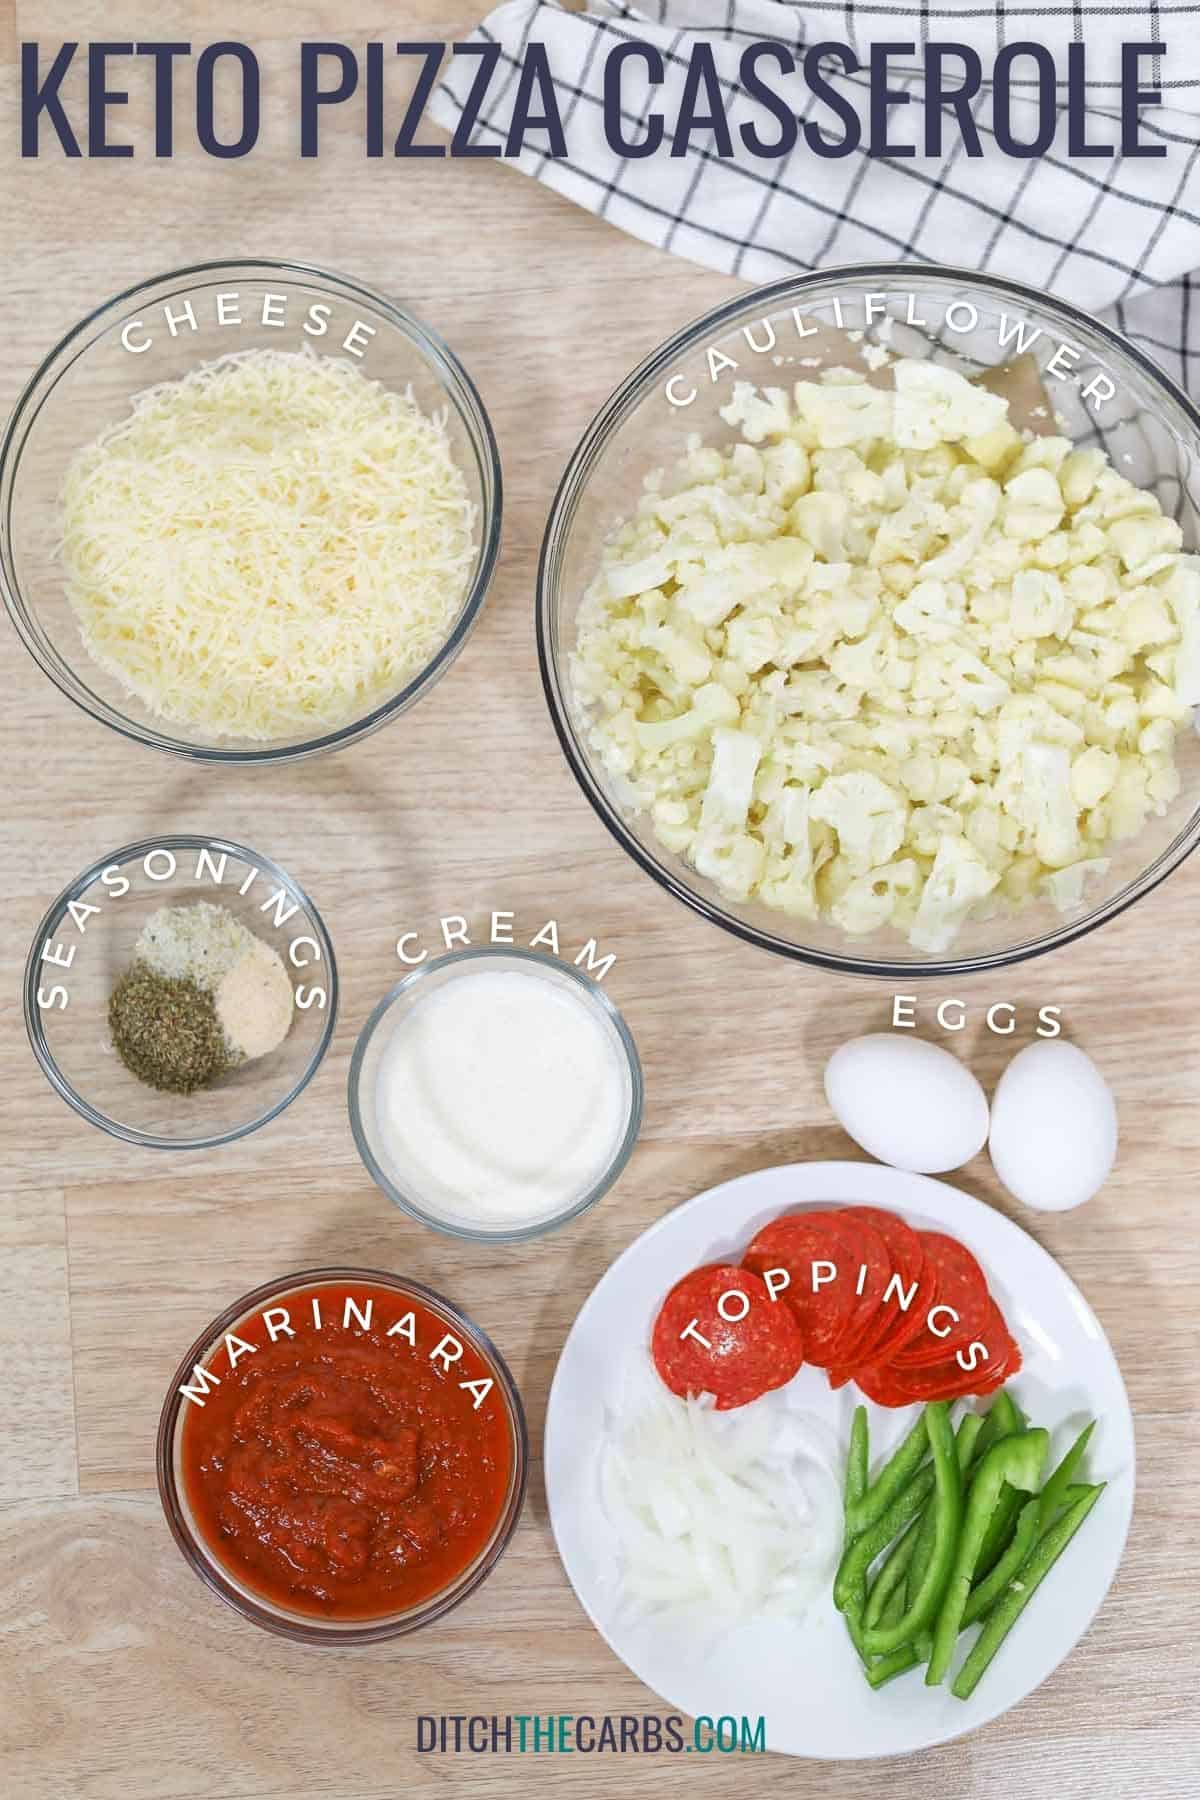 All the ingredients needed to make keto pizza casserole are measured and place in clear glass bowls on the counter.